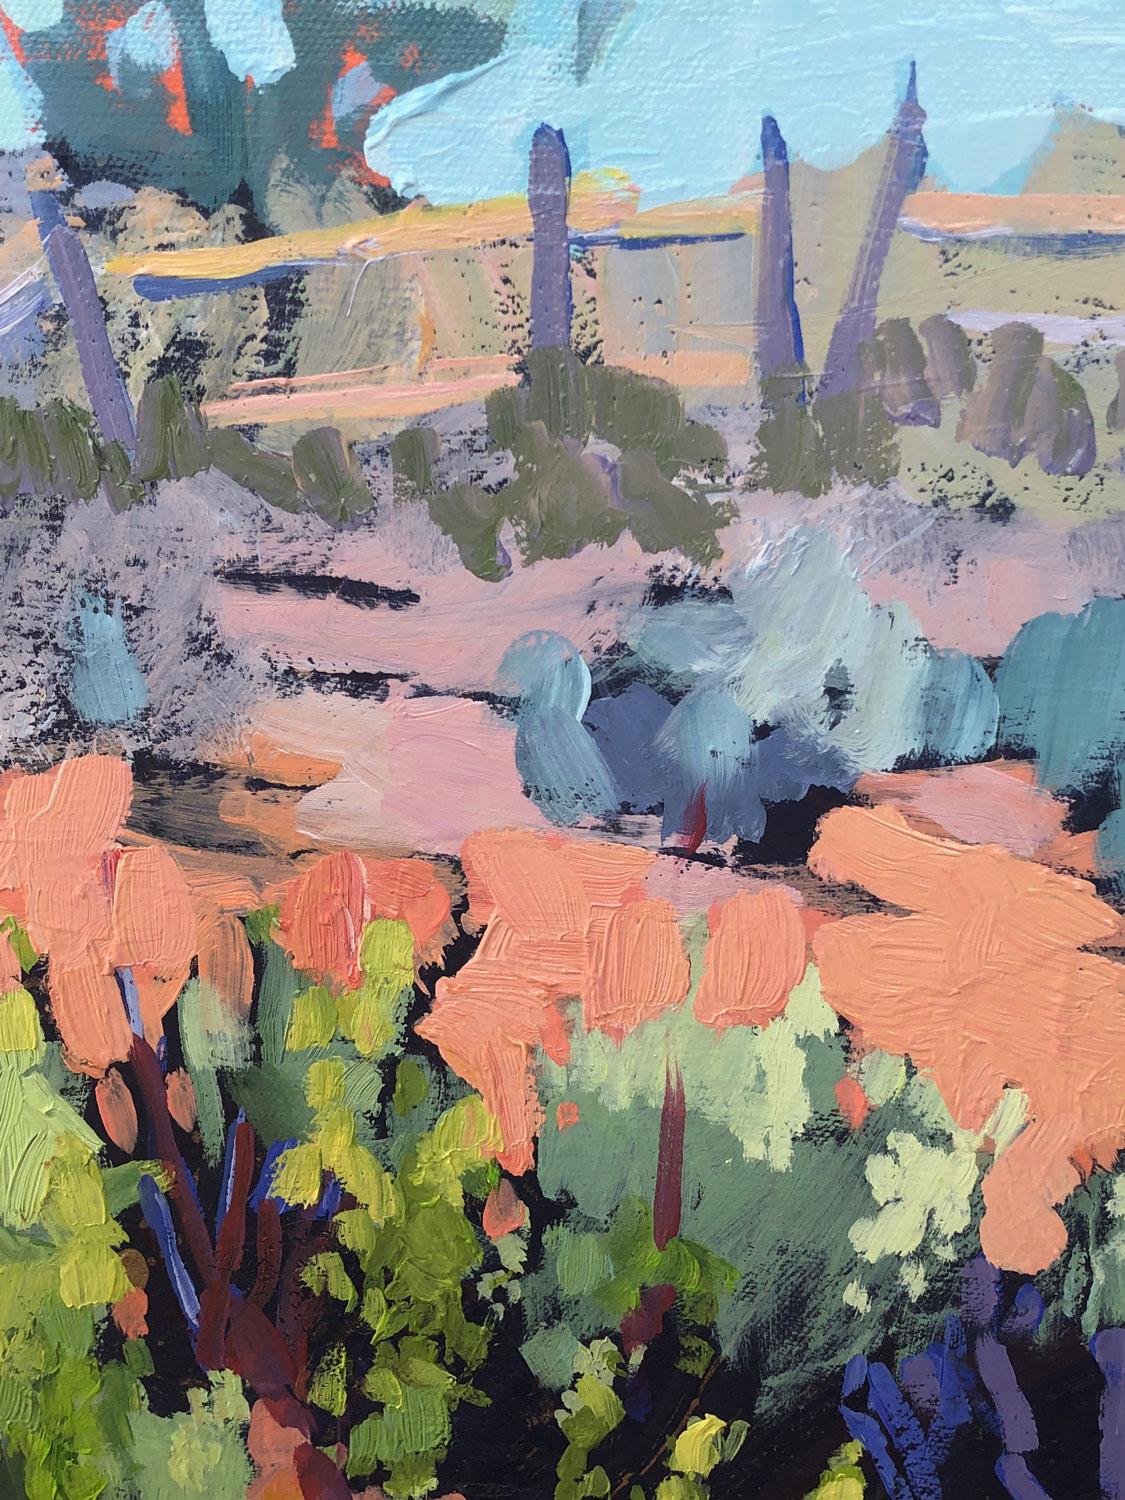 <p>Artist Comments<br />Tara took the reference photo of this sage filled desert landscape while living in New Mexico. To prepare the canvas, she used a warm peach color as her underpainting and layered swatches of a deep blue collage paper with